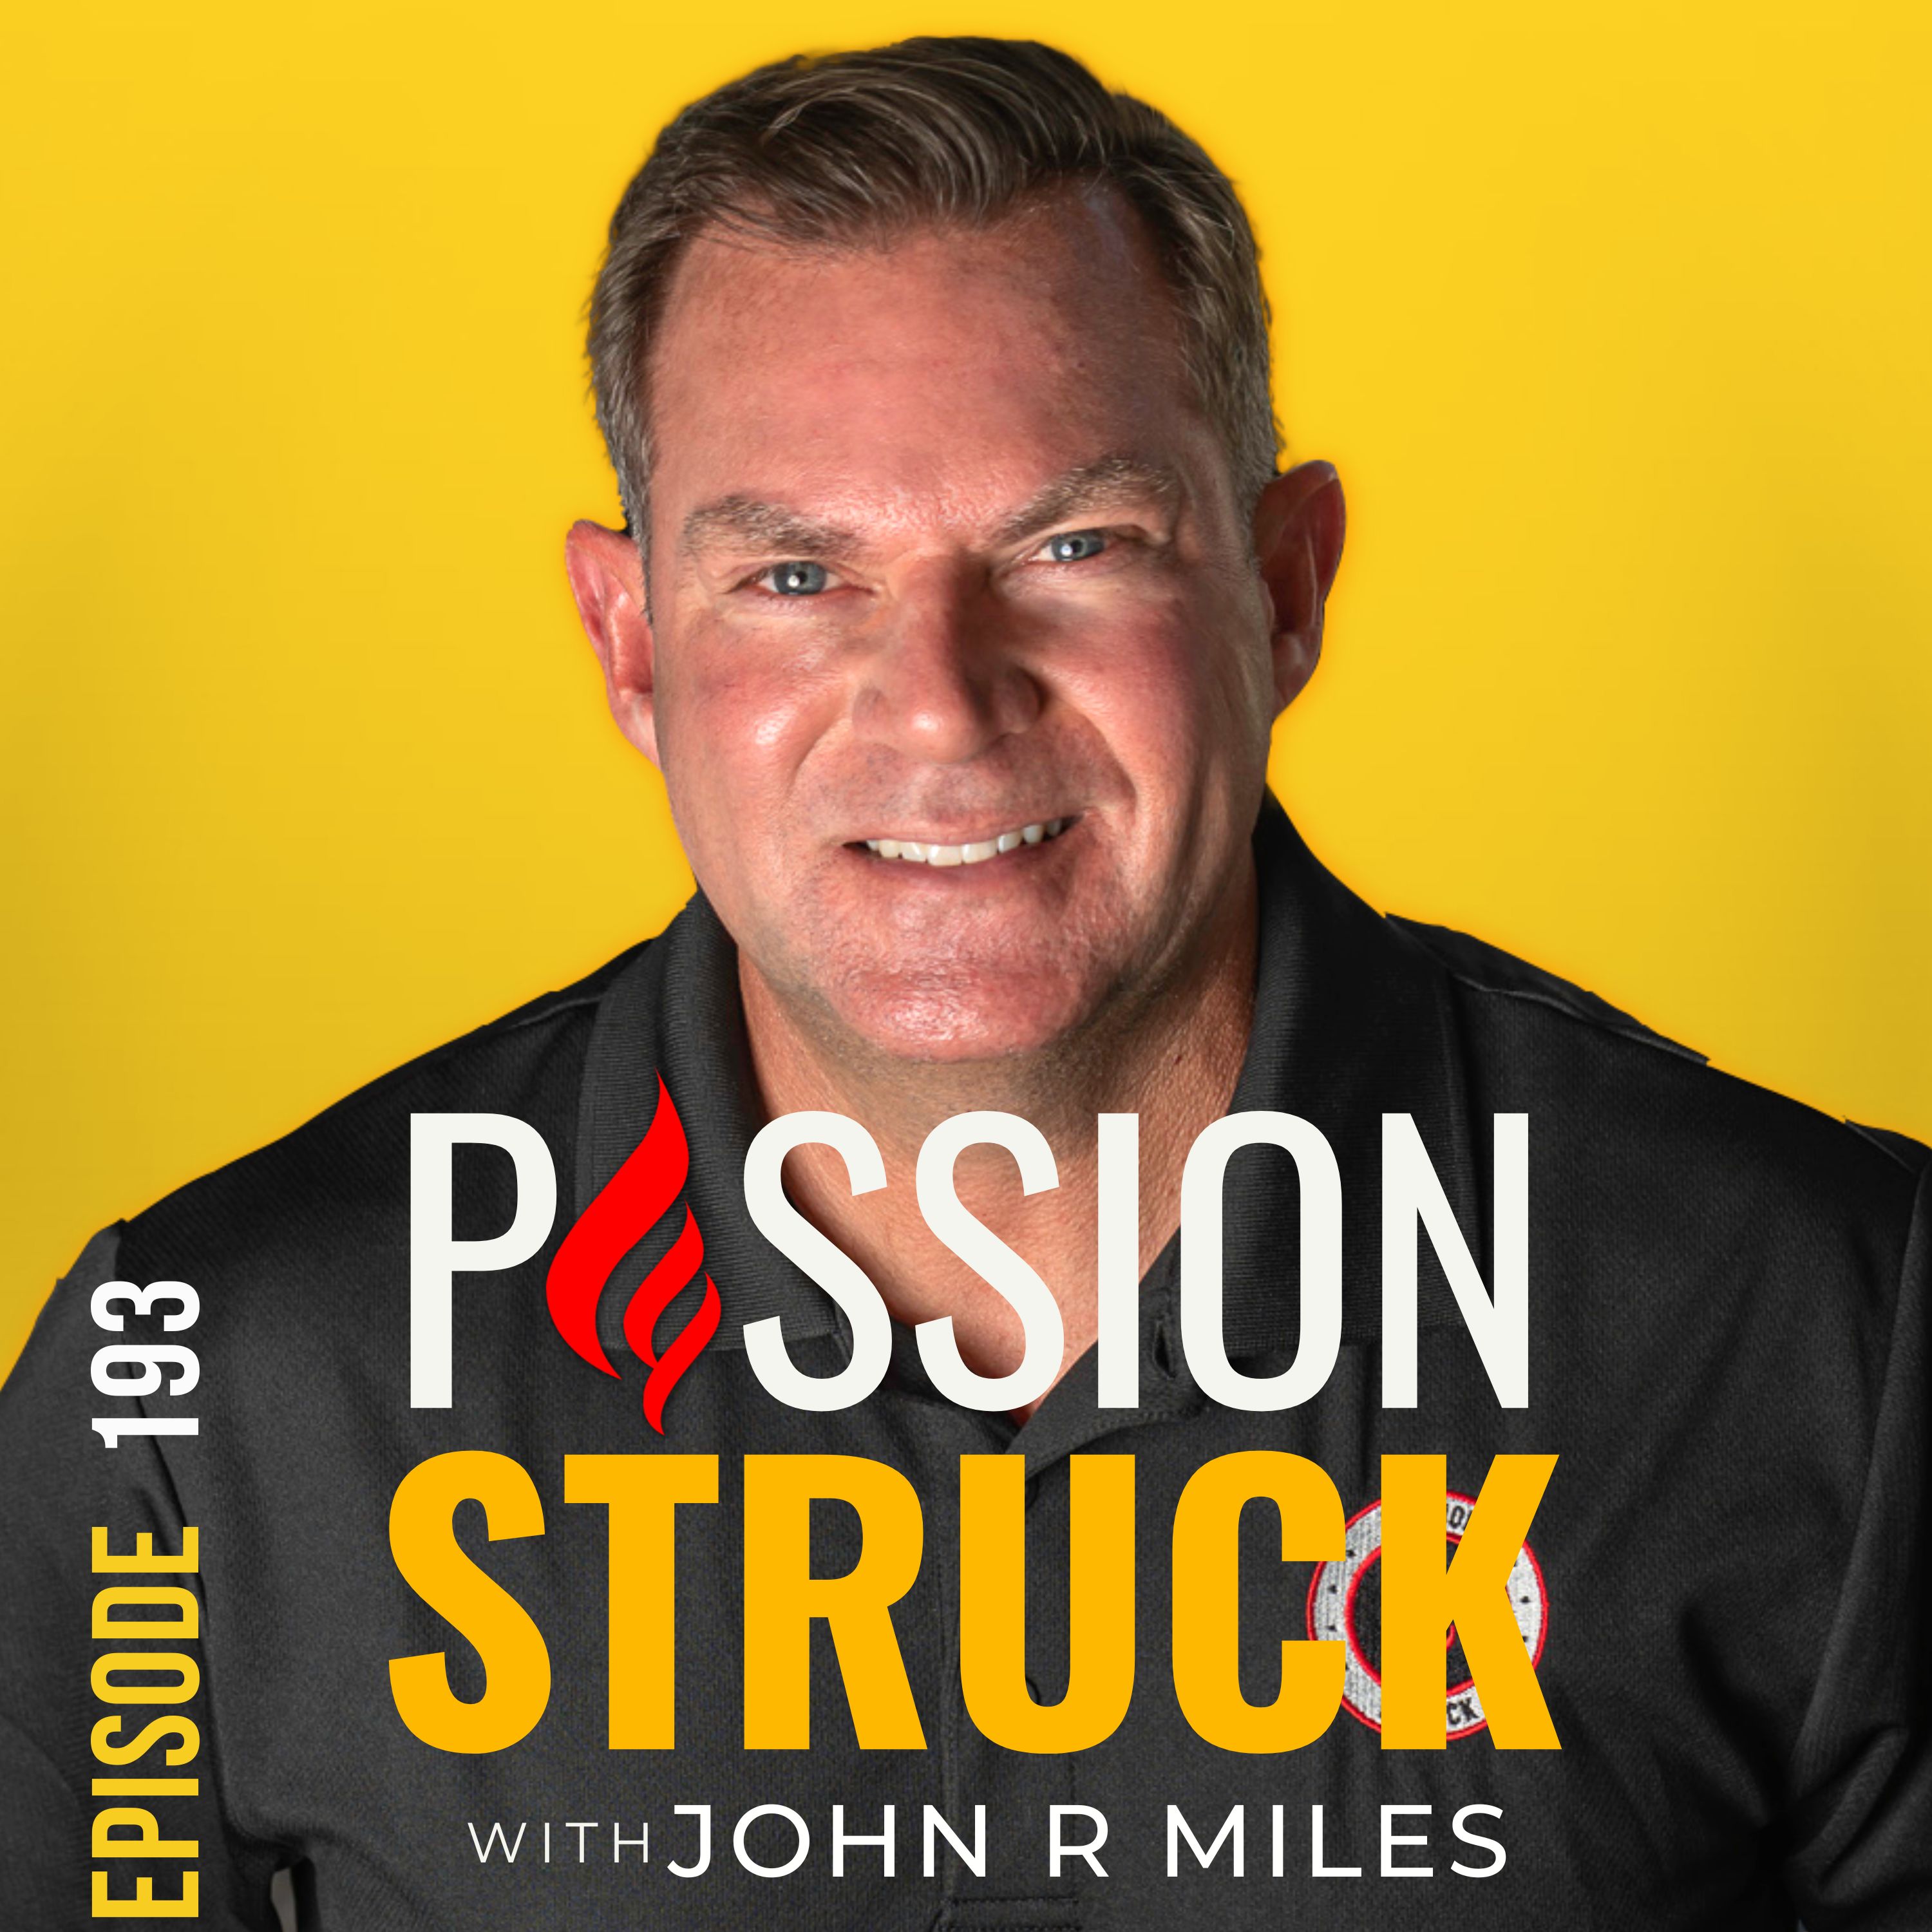 Passion Struck with John R. Miles album cover episode 193: 5 Steps to Change Your Perception and Better Your Reality